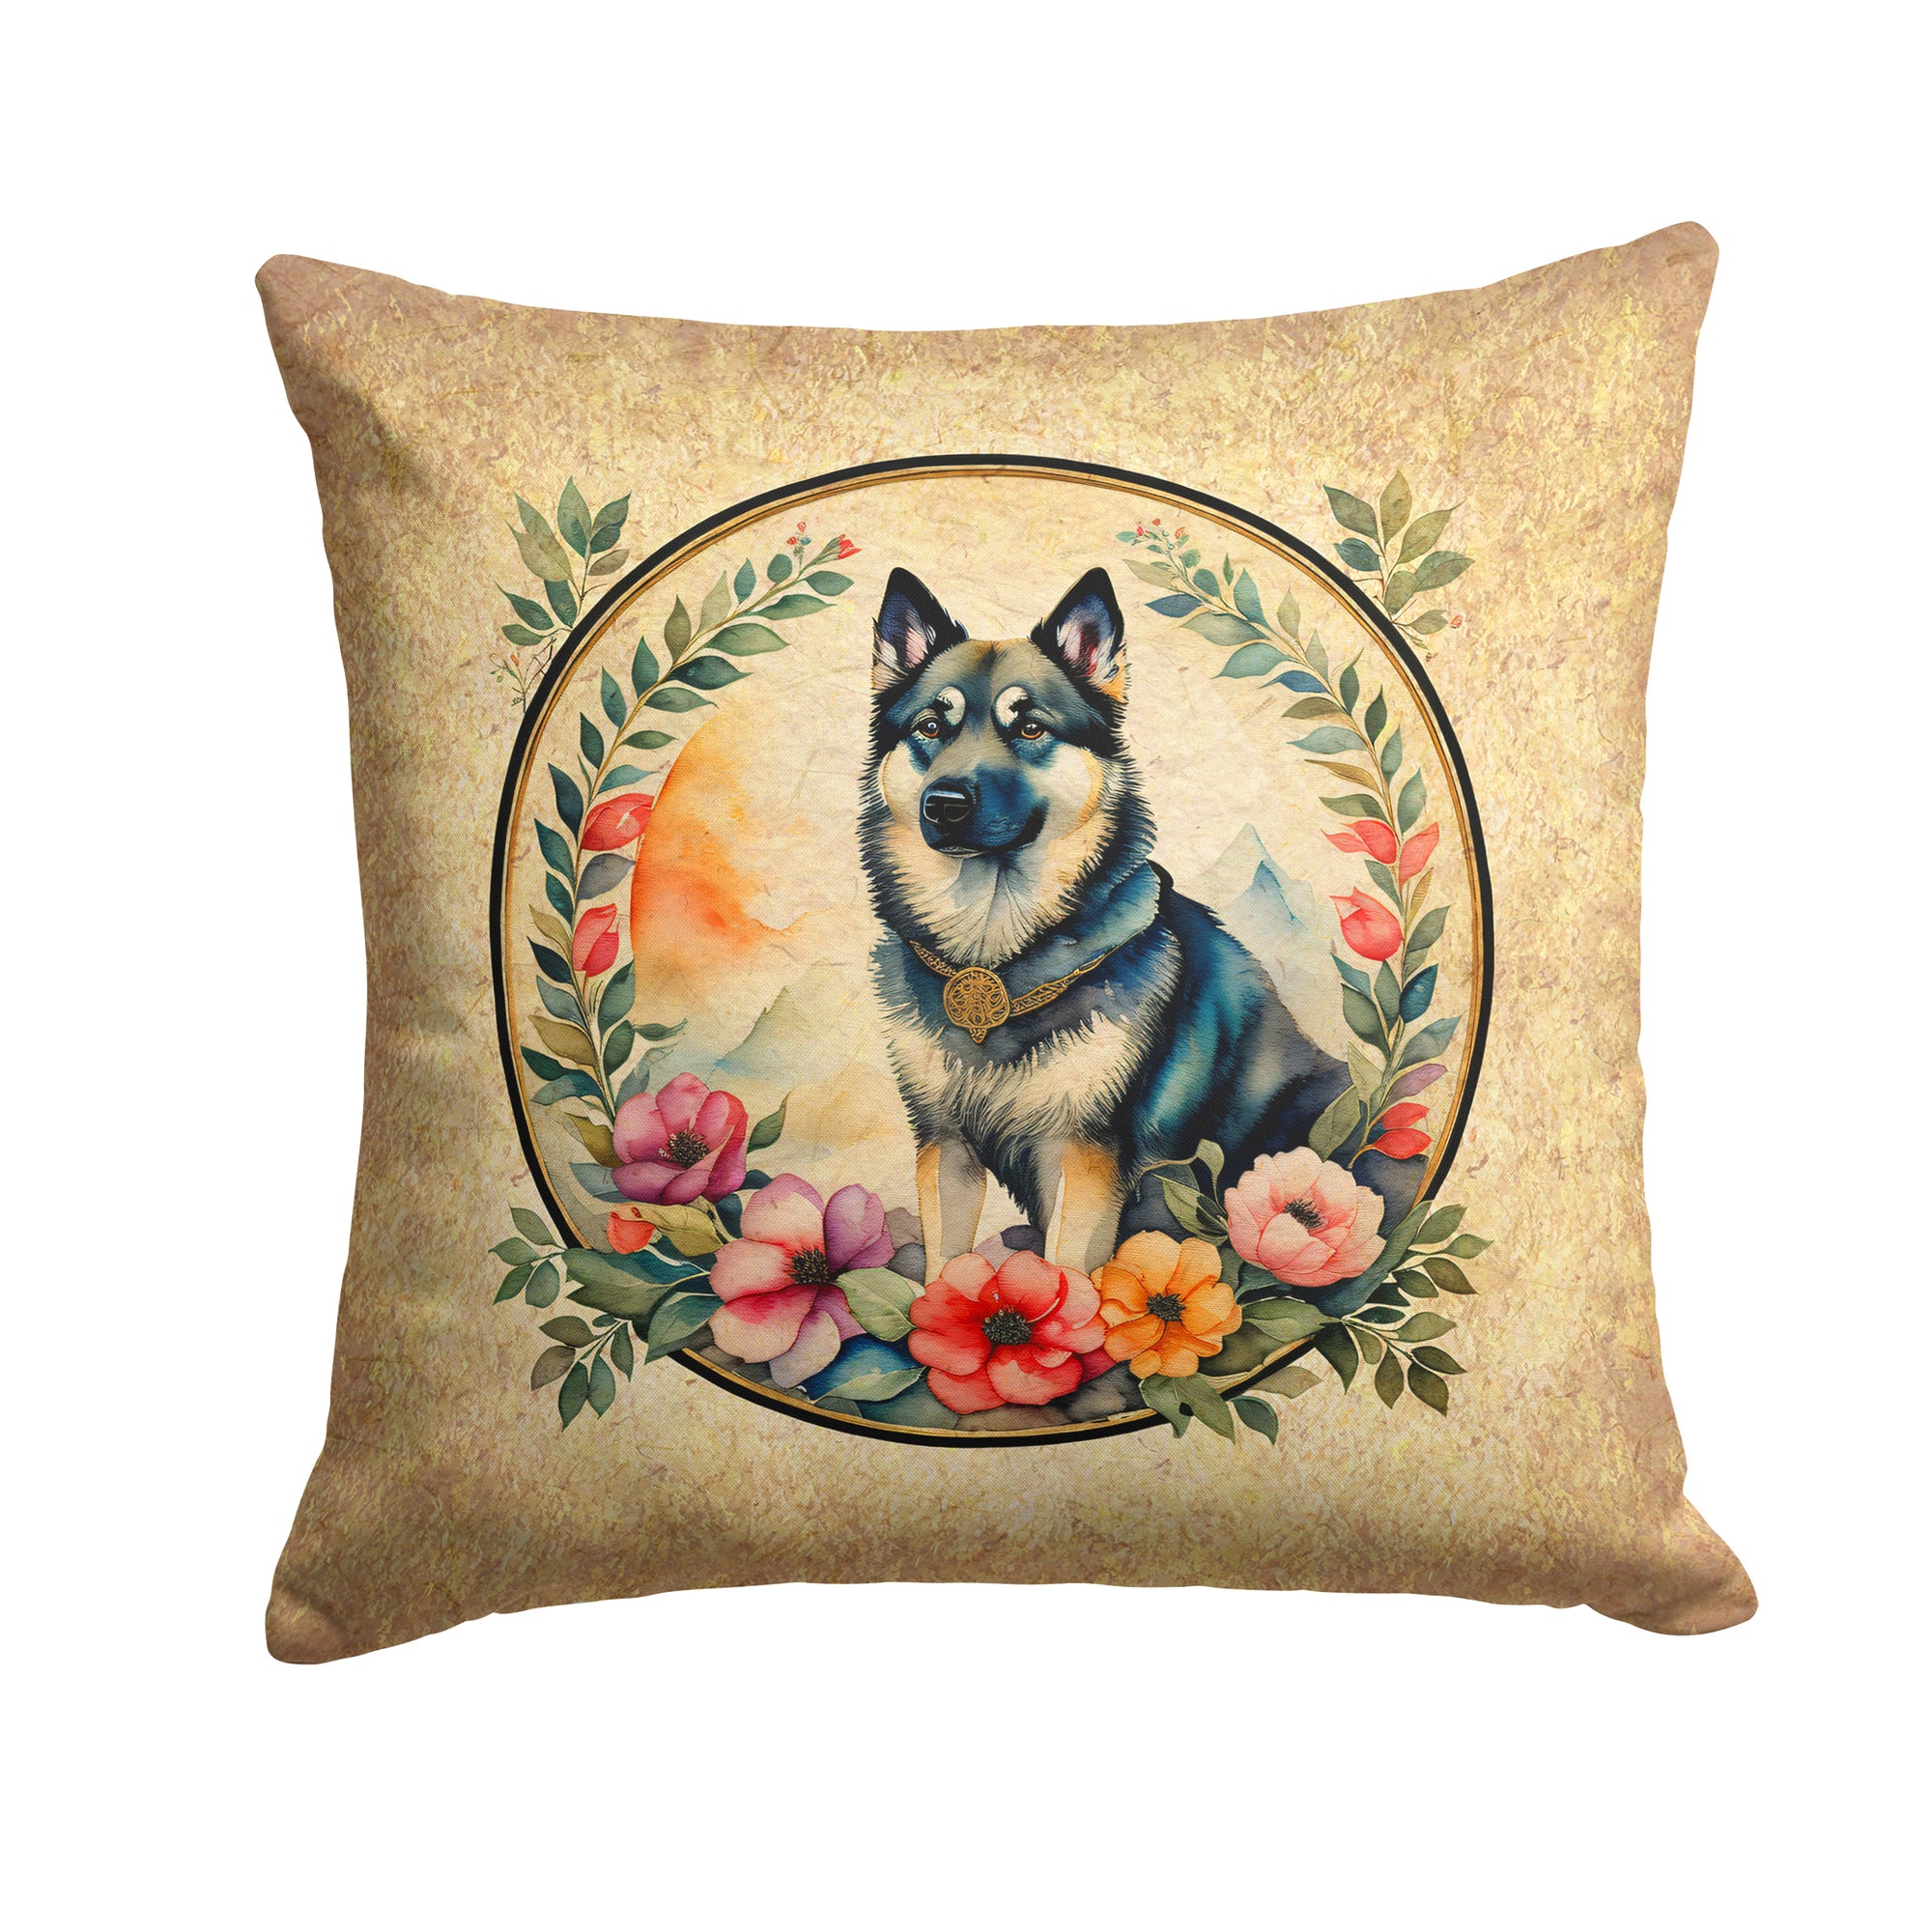 Buy this Norwegian Elkhound and Flowers Fabric Decorative Pillow